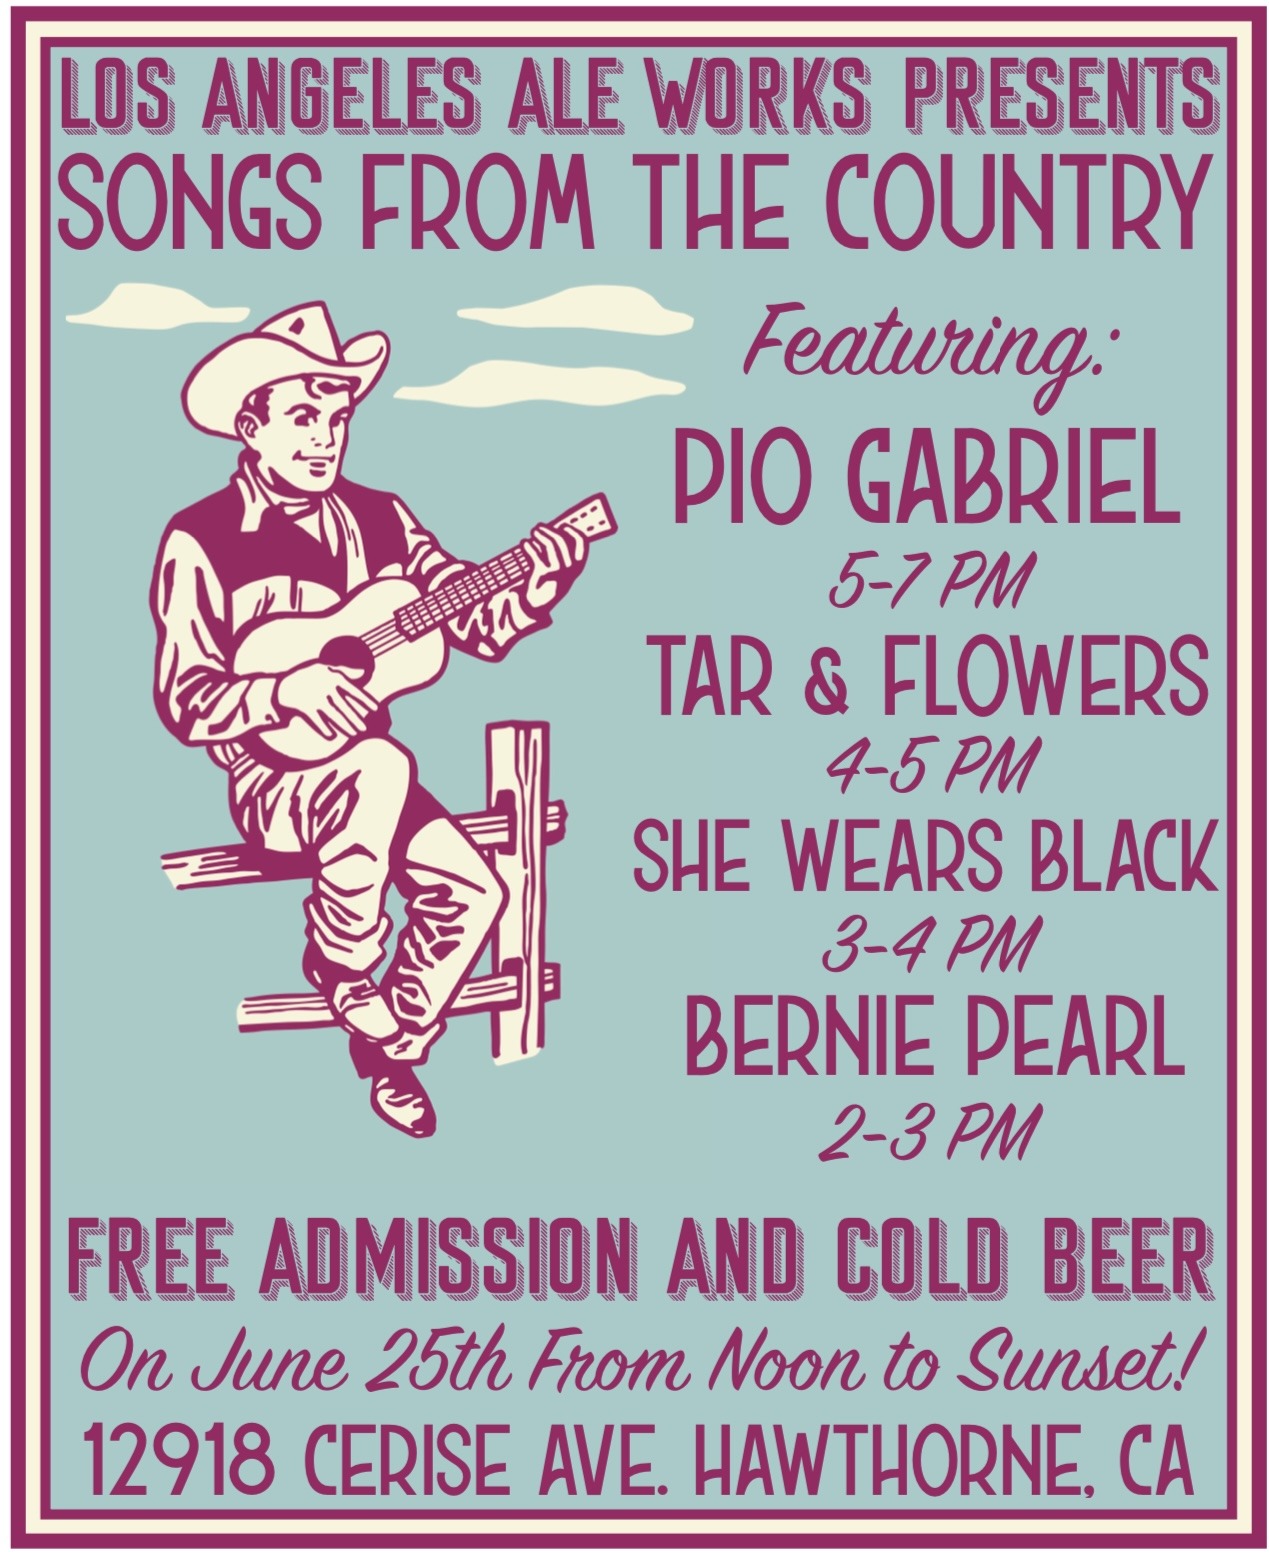 Los Angeles Ale Works Presents: Songs from the Country! Featuring Pio Gabriel, Tar & Flowers, She Wears Black, Bernie Pearl. June 2 from 2-7pm